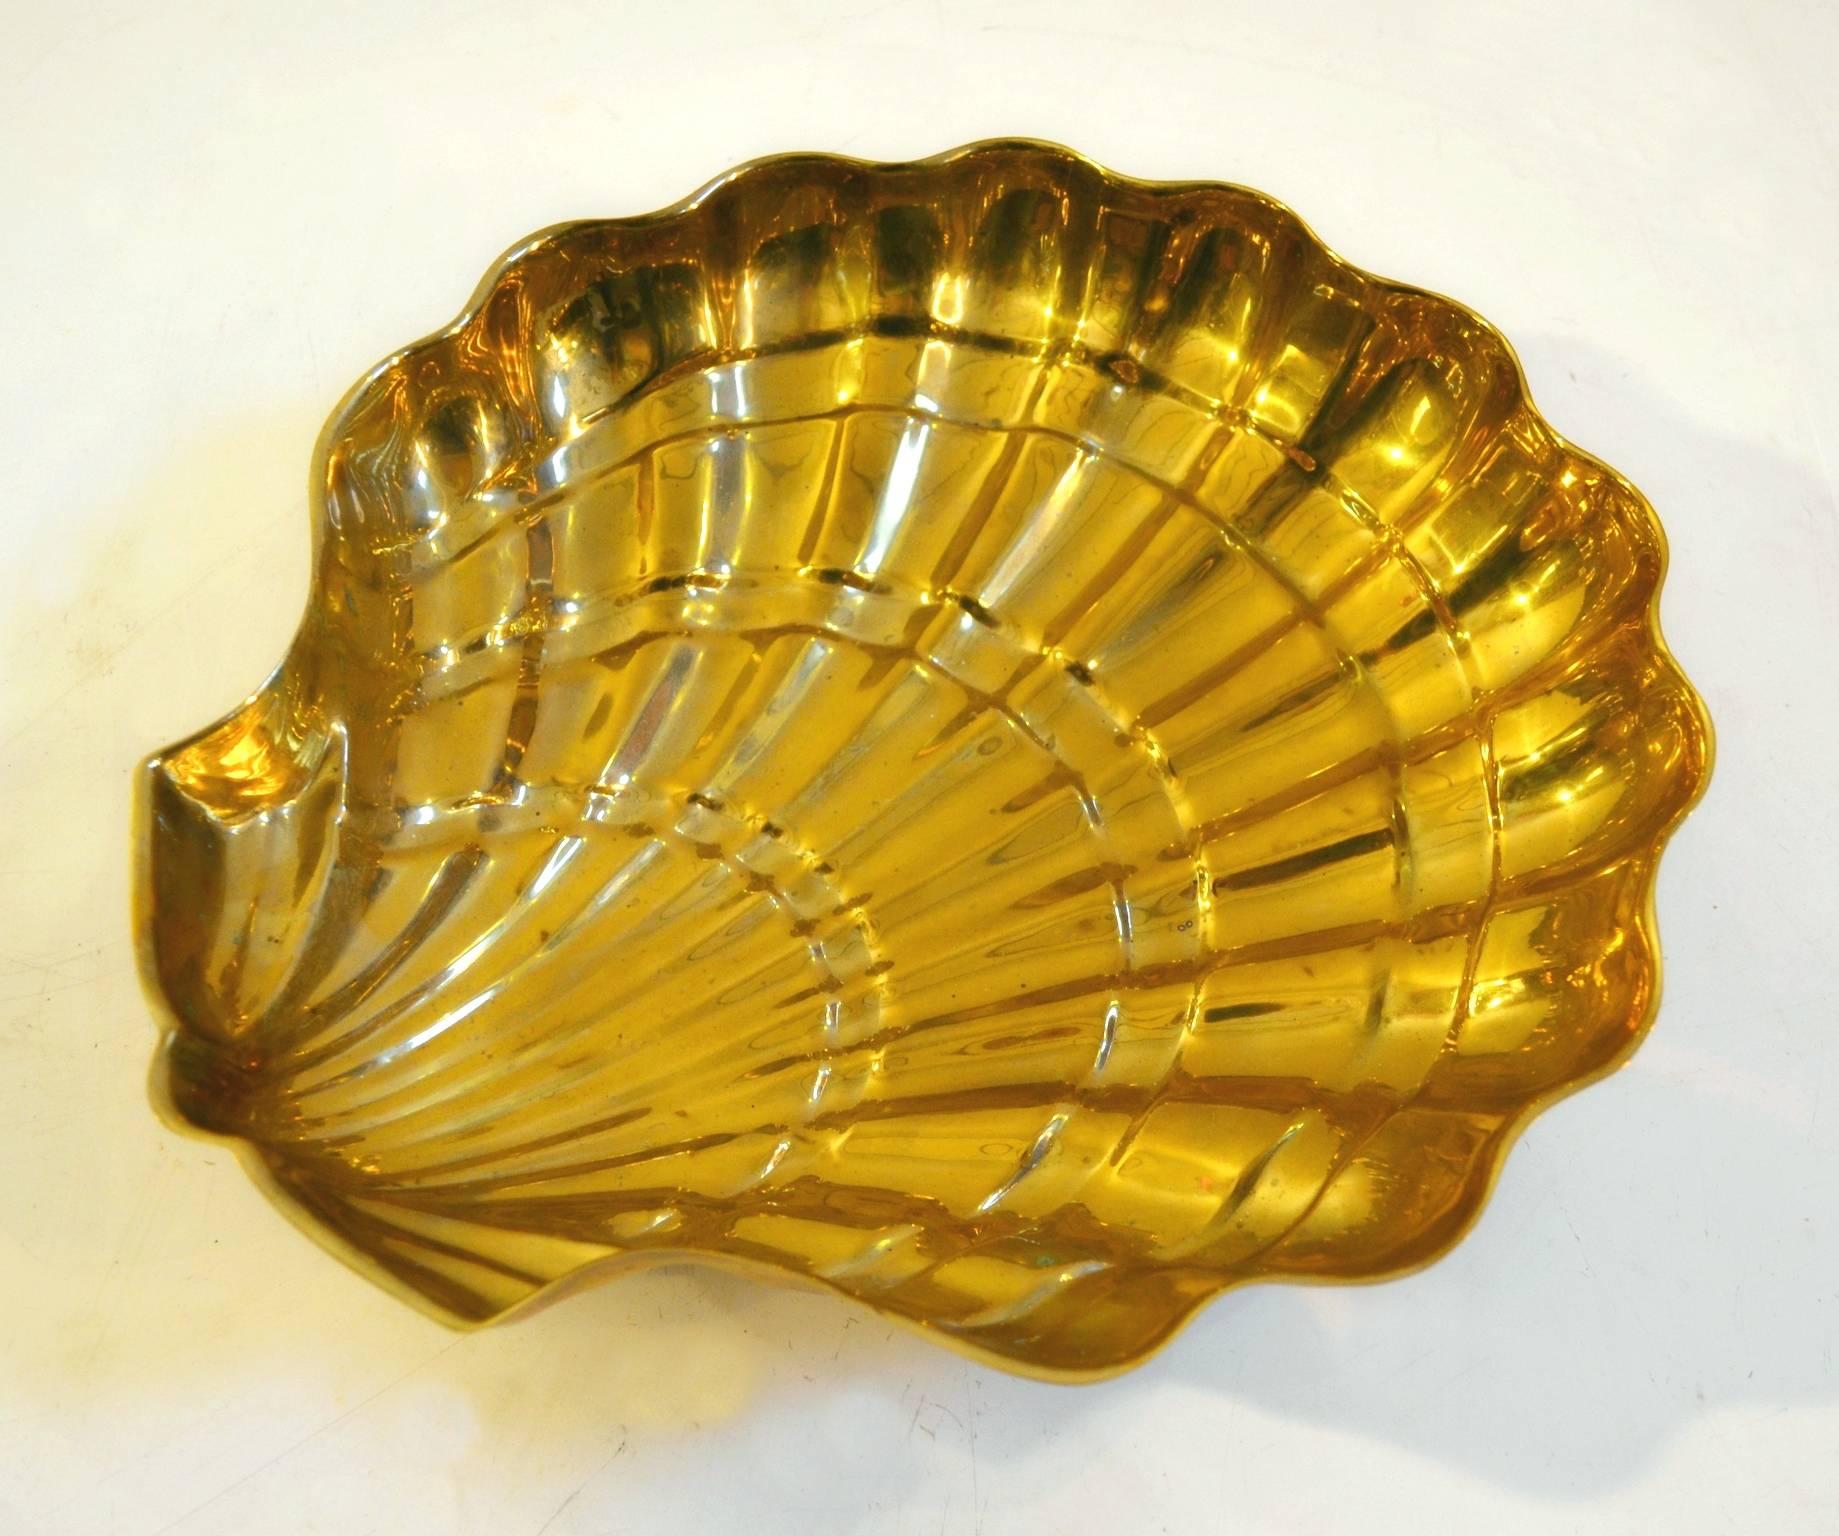 A large bowl in brass shaped in the form of a clam shell standing on small feet. Great for pure decorative purposes or as a fruit bowl.